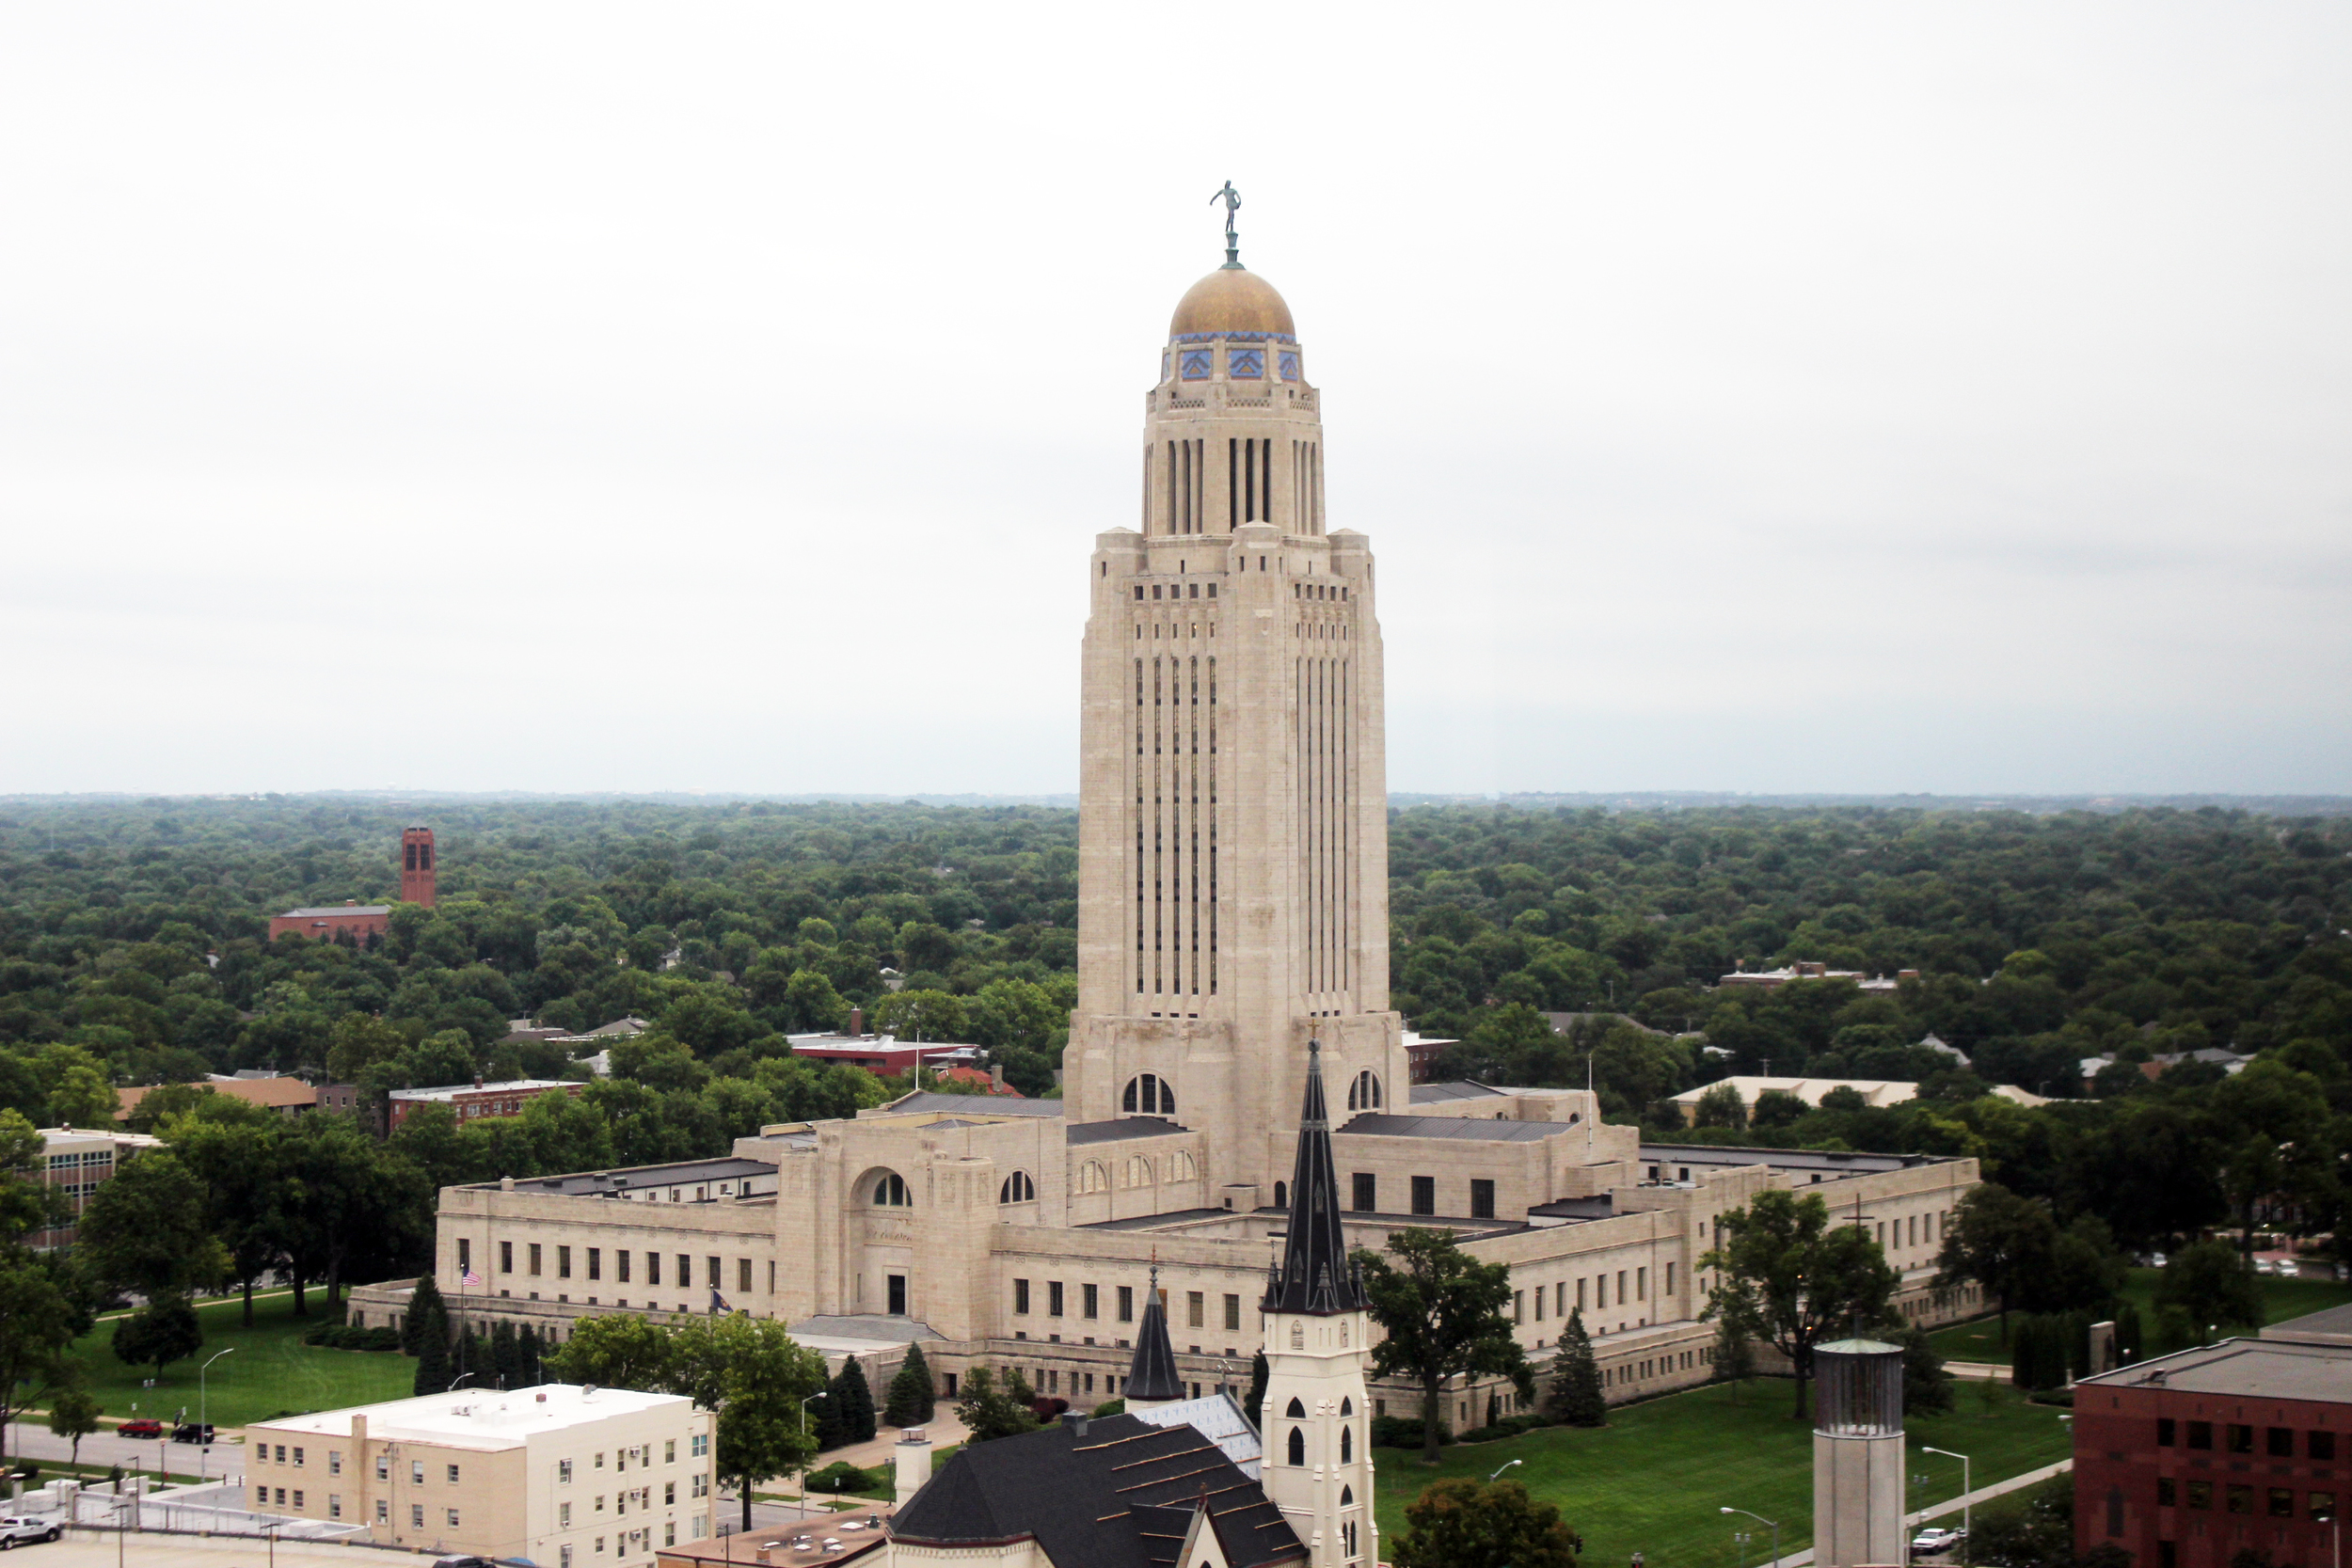 Wonderful view of the State Capital from the Nebraska Club